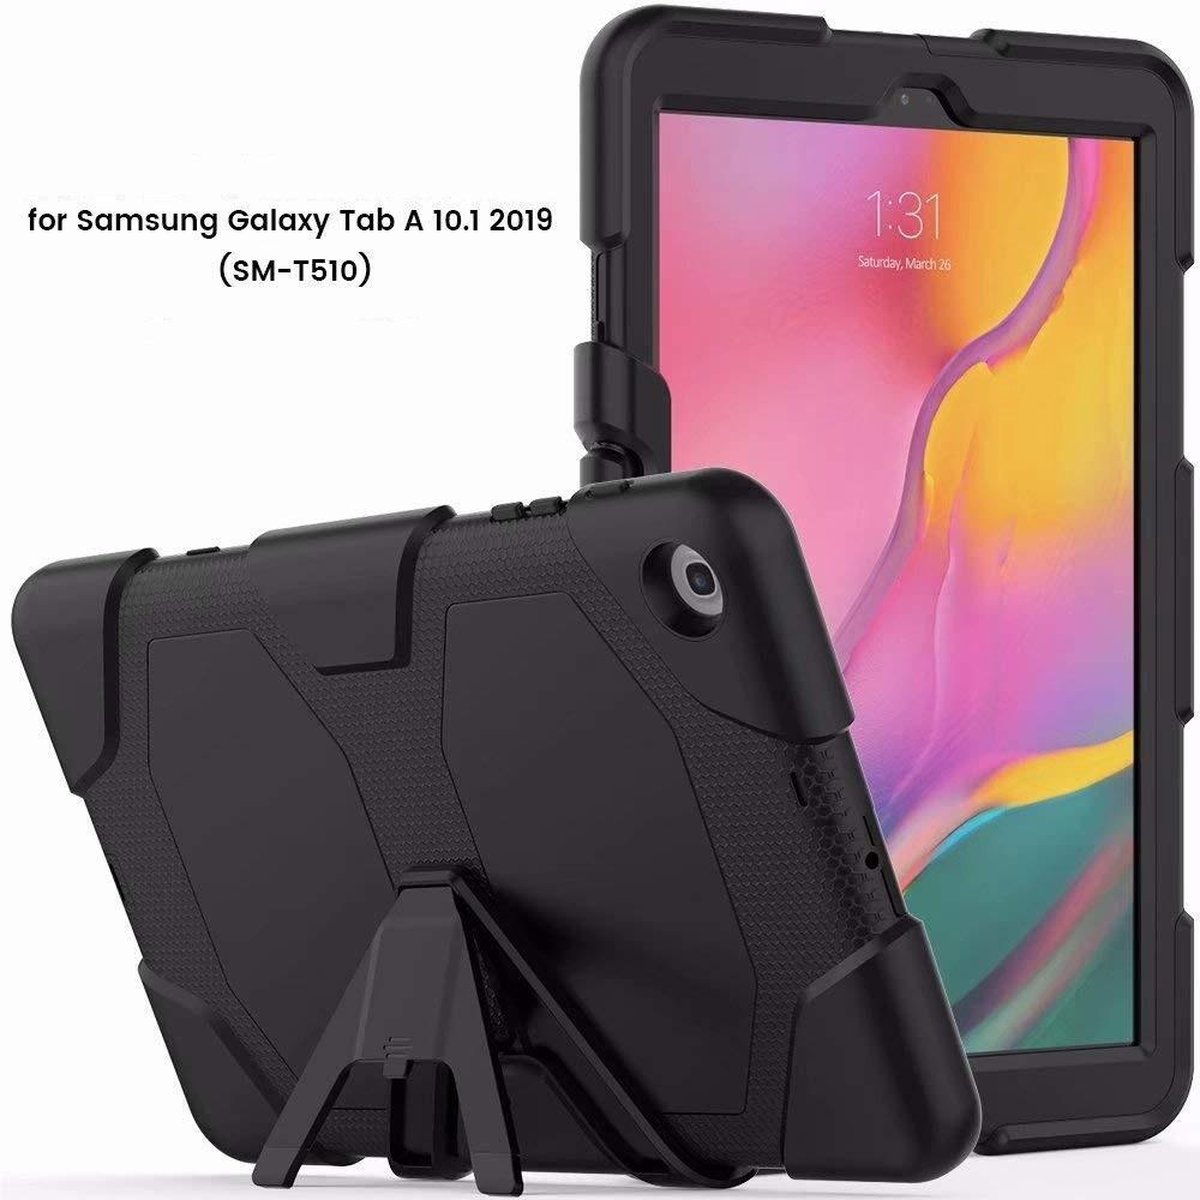 Tablet hoes voor Samsung Tab A 2019 10.1 inch - Extreme Robuust Armor Case Hoesje - Tablethoes - Samsung tab A screenprotector Ingebouwde Extreme protectie Army Backcover hoes - Ntech